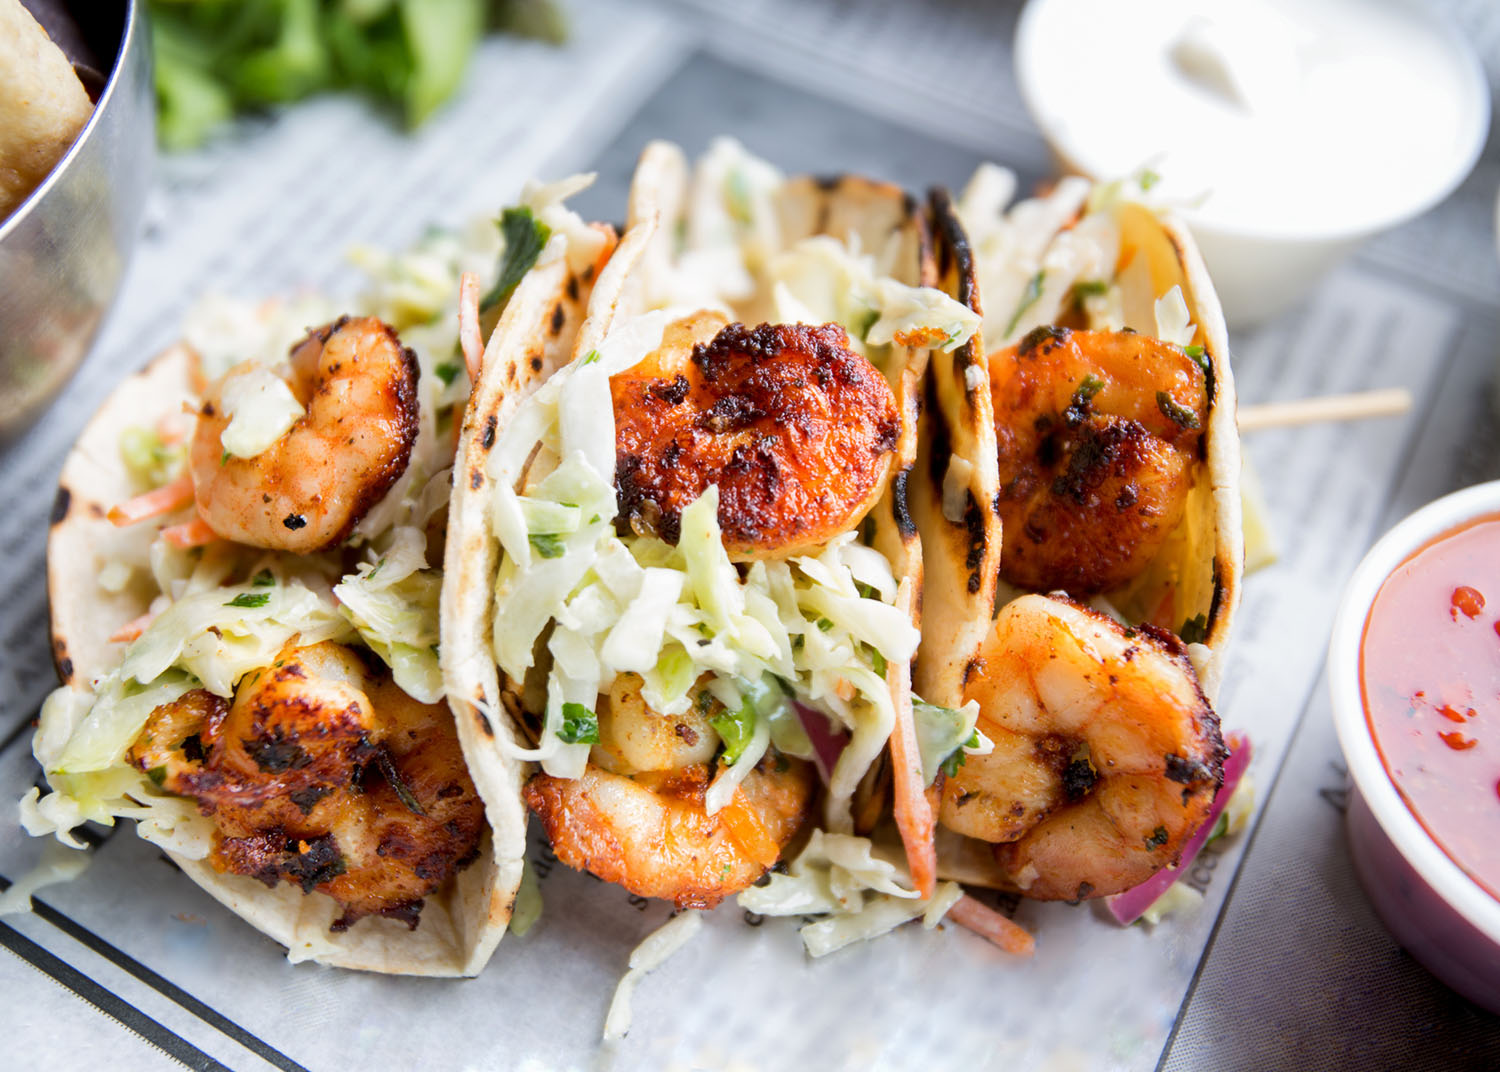 Grilled jumbo shrimp in corn tortilla tacos with cabbage garnish on an old fashioned newspaper wrapper.